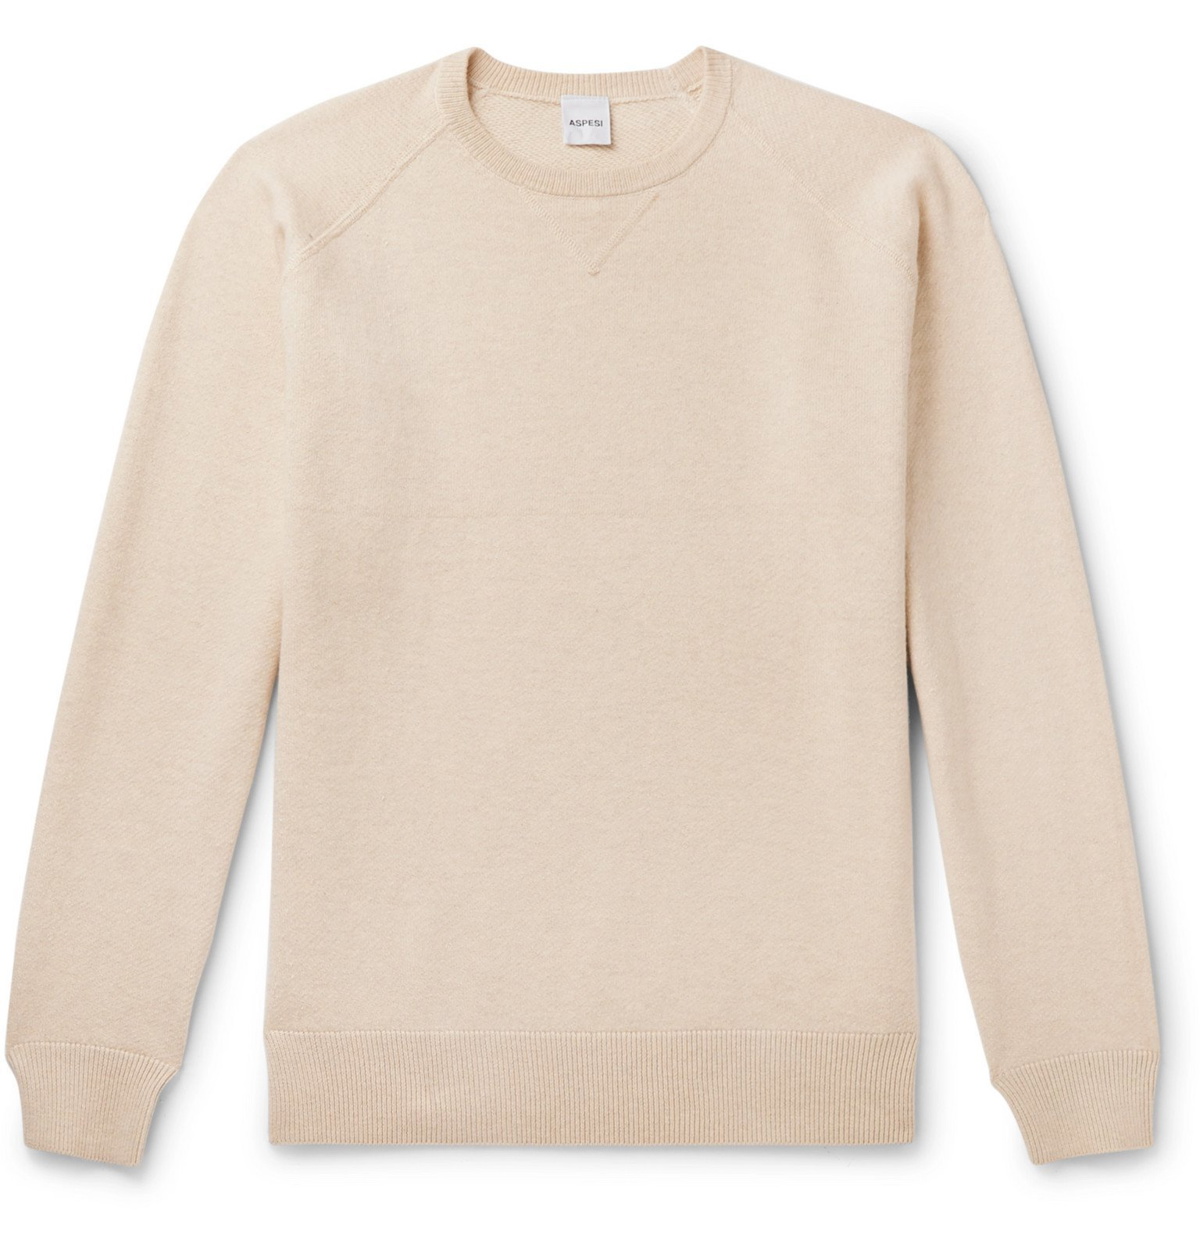 Aspesi - Slim-Fit Loopback Cotton, Cashmere and Wool-Blend Sweater